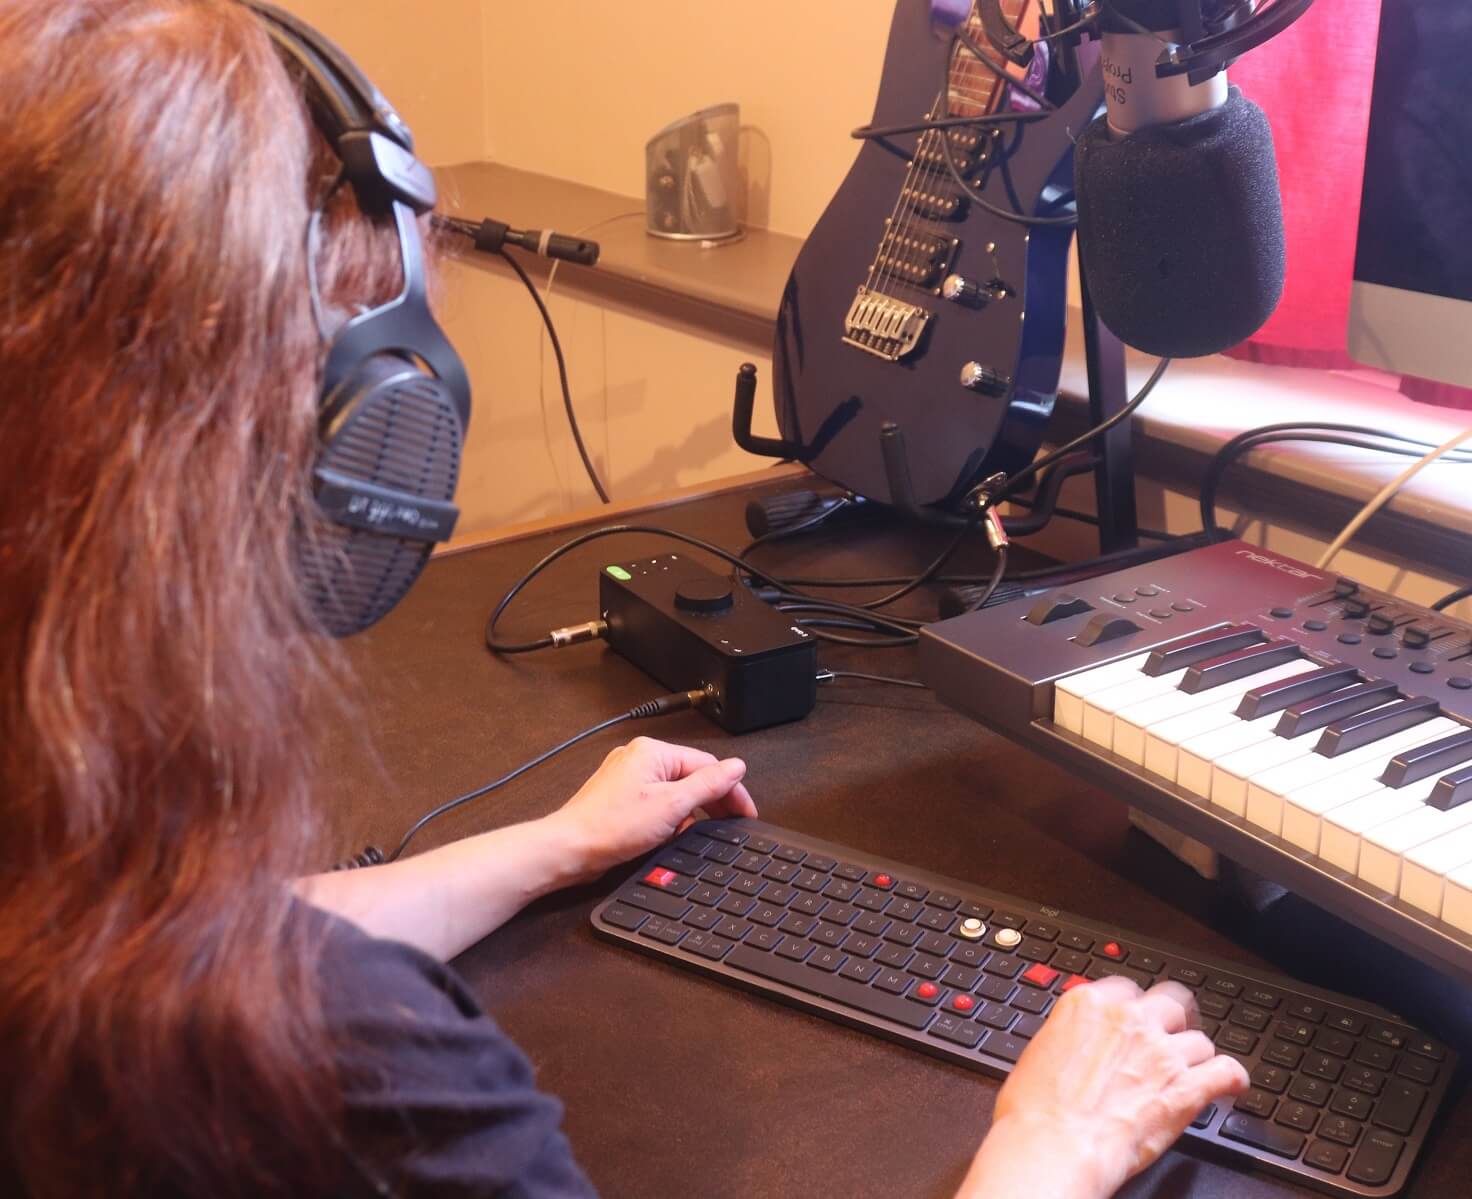 Jenny at her audio workstation with EVO 8 audio interface